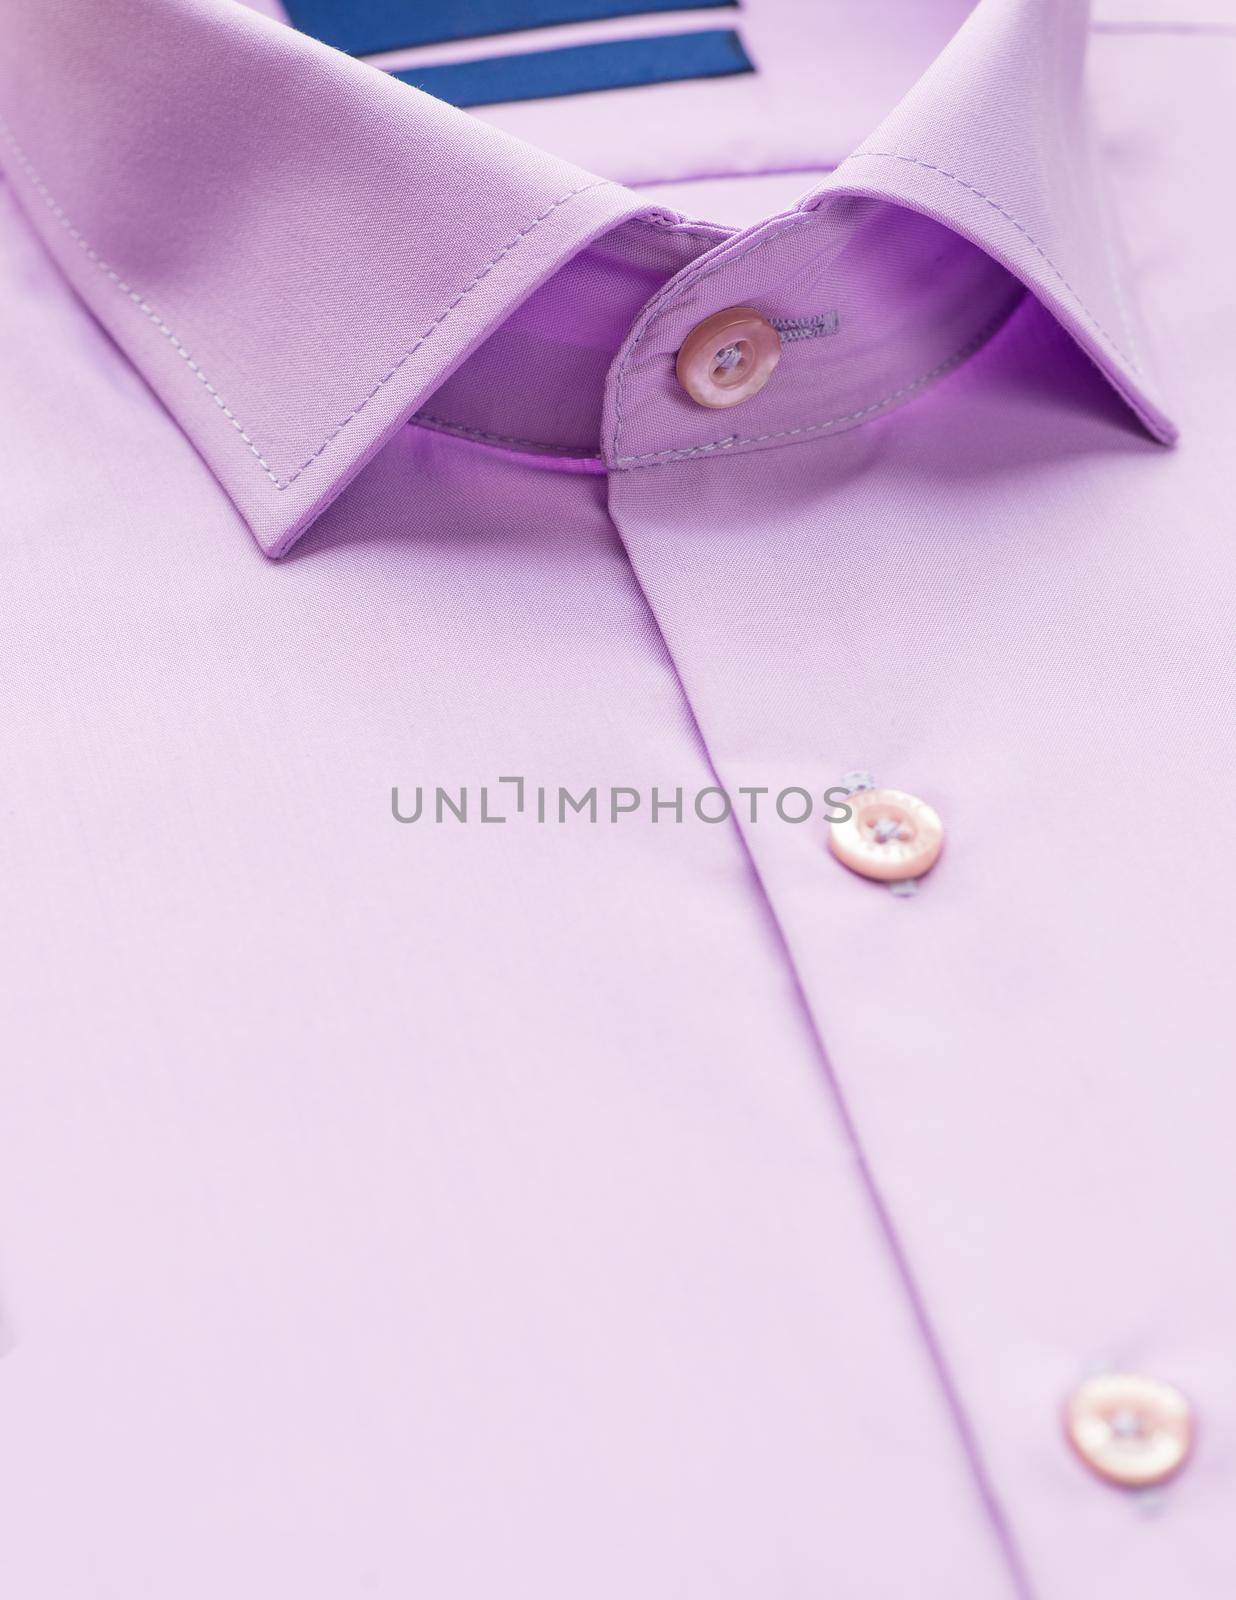 pink shirt with a focus on the collar and button, close-up